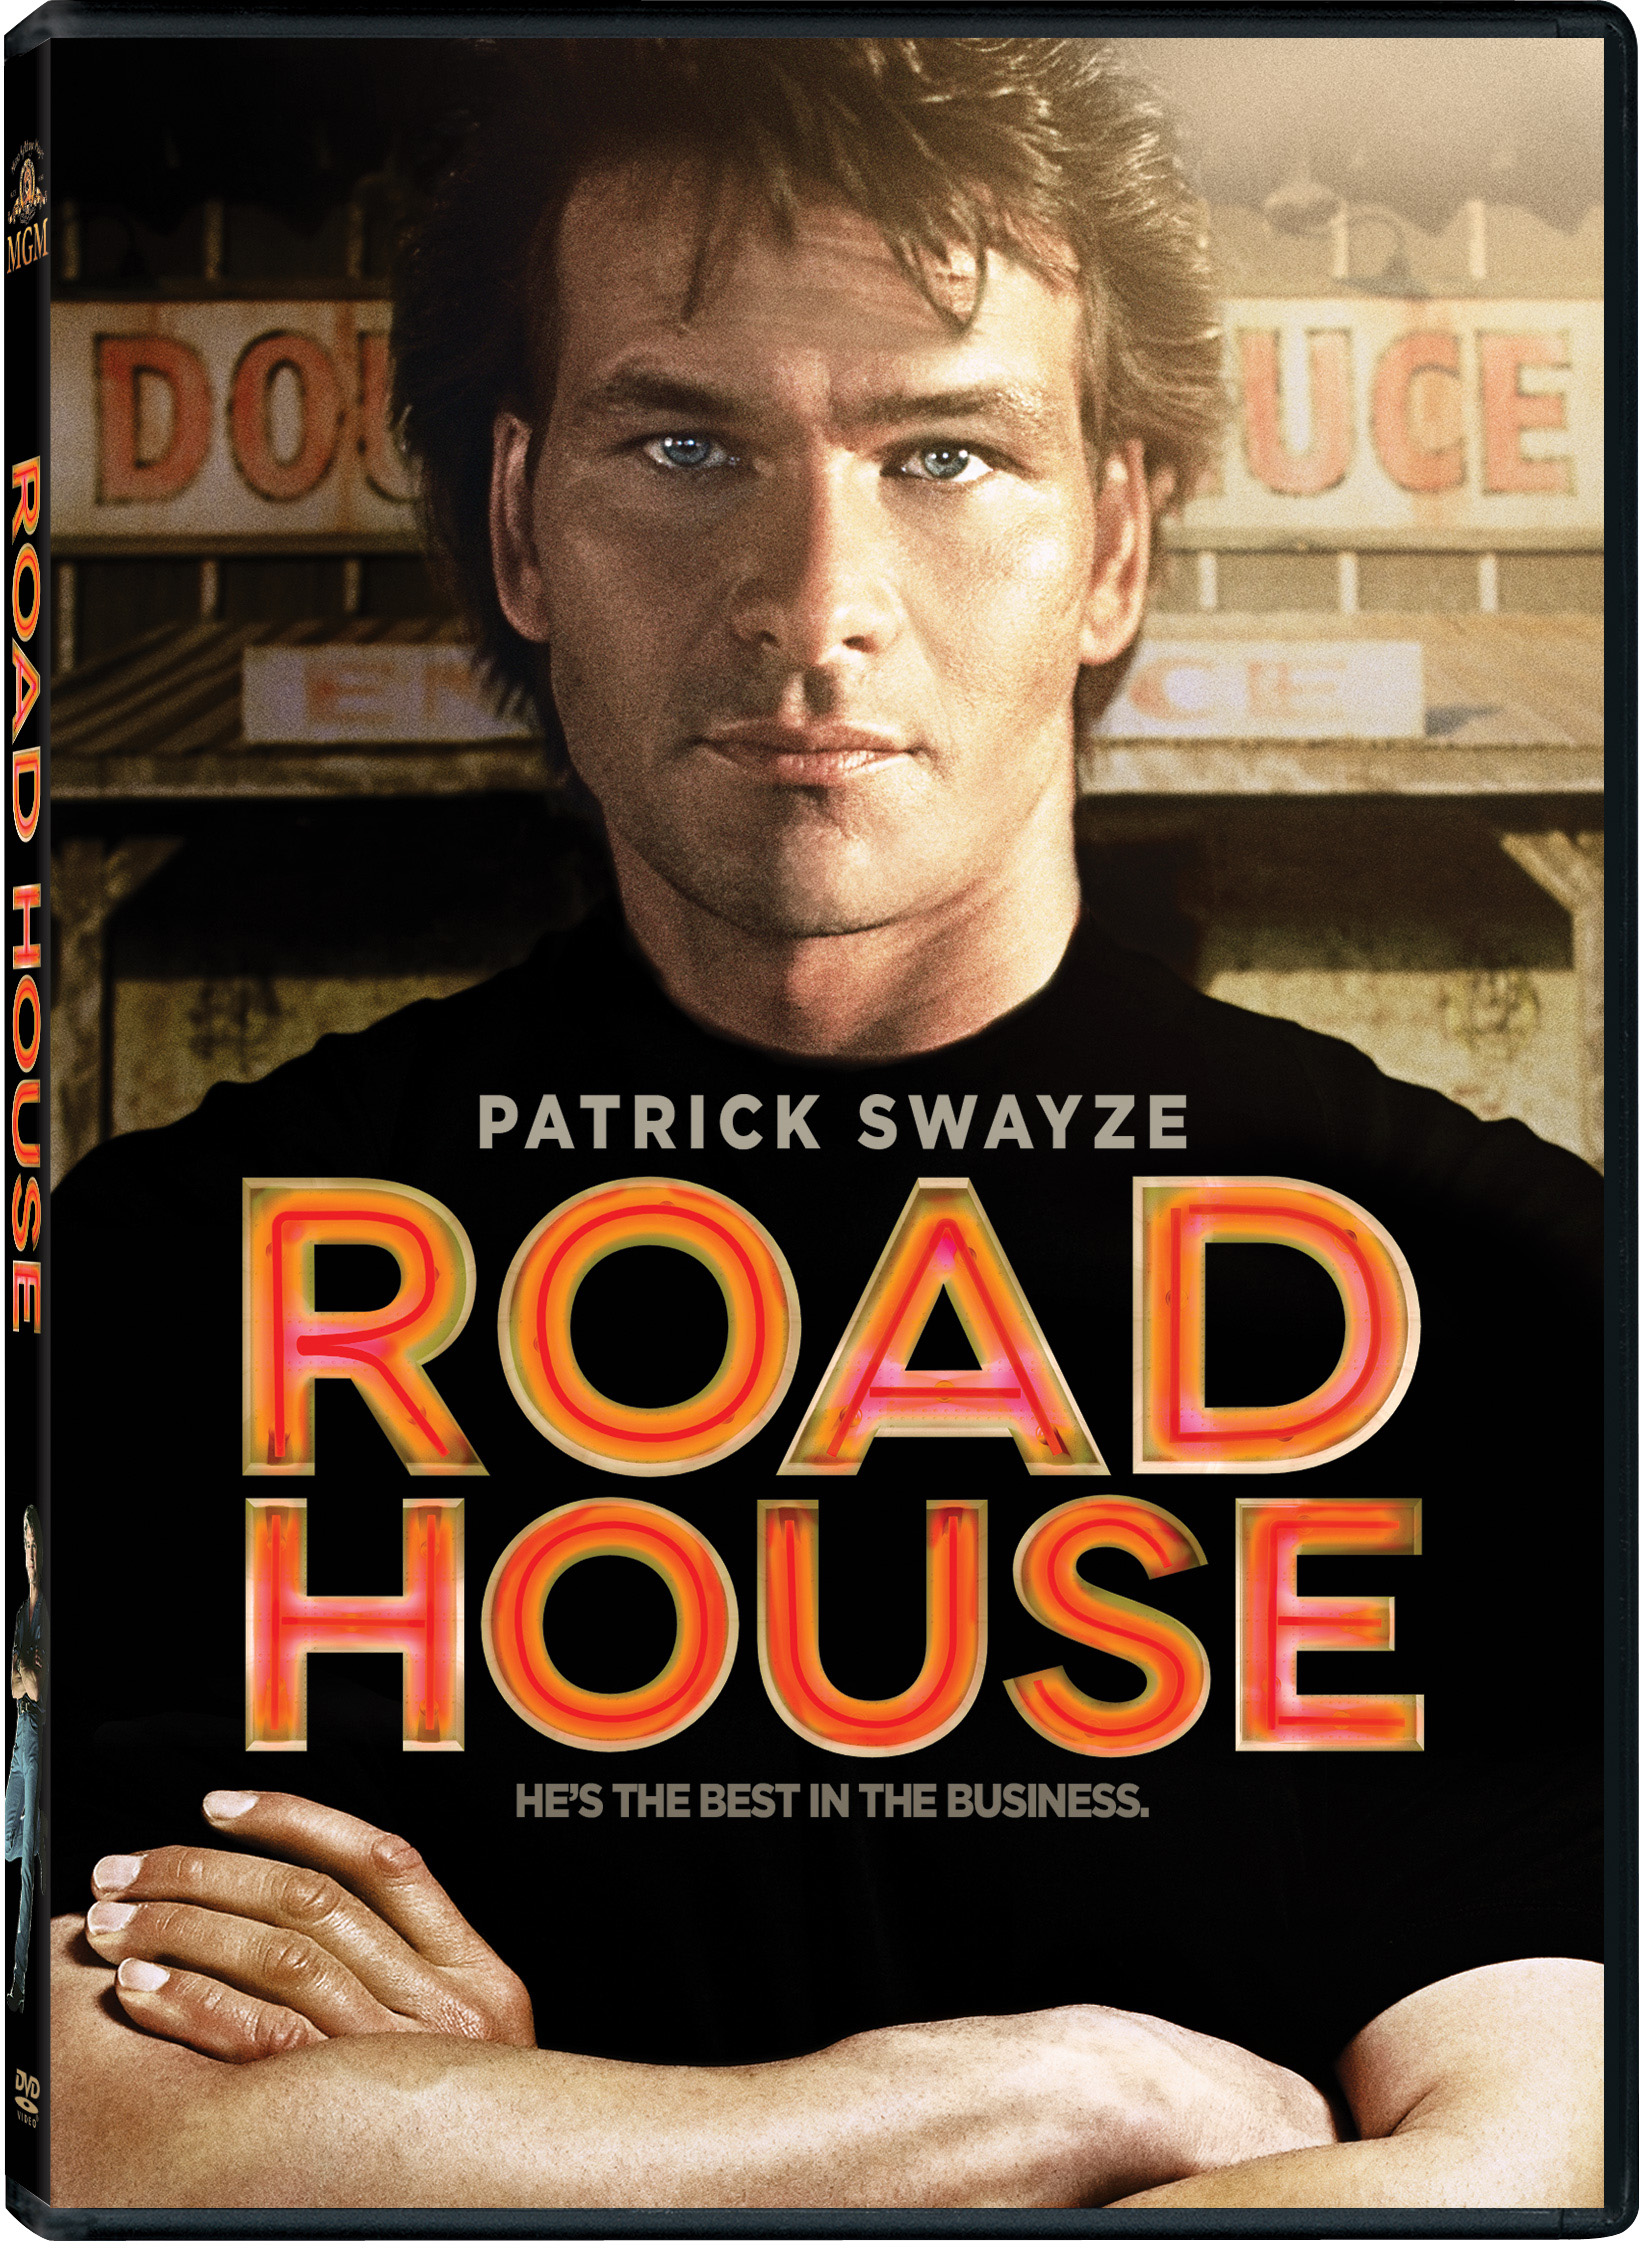 Road House (DVD), MGM (Video & DVD), Action & Adventure - image 2 of 2